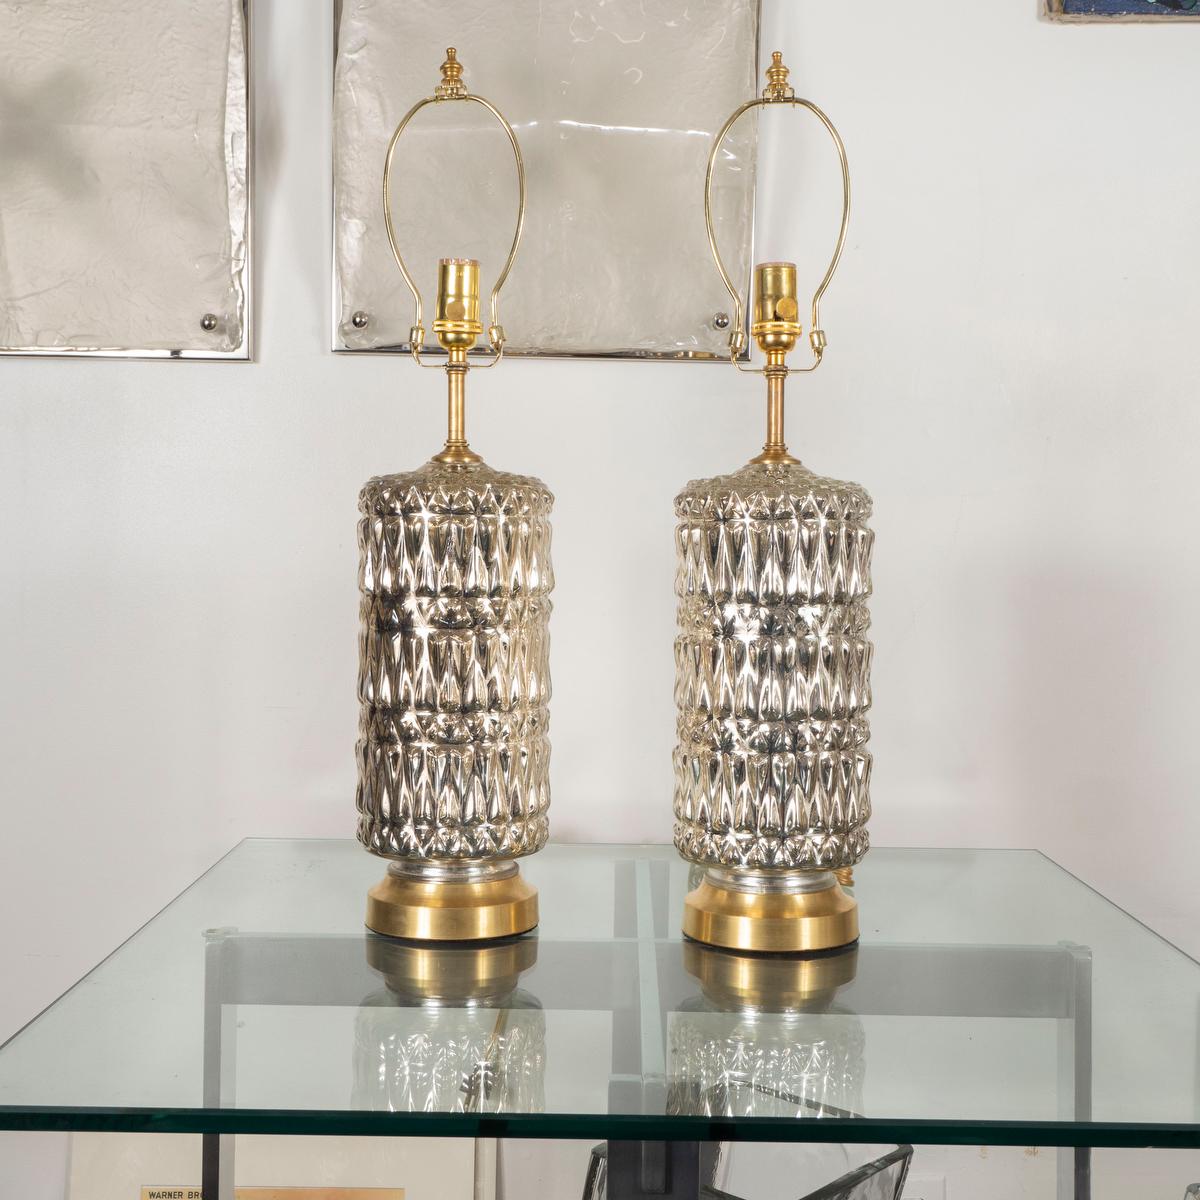 Pair of cylindrical molded mercury glass lamps with diamond pattern.